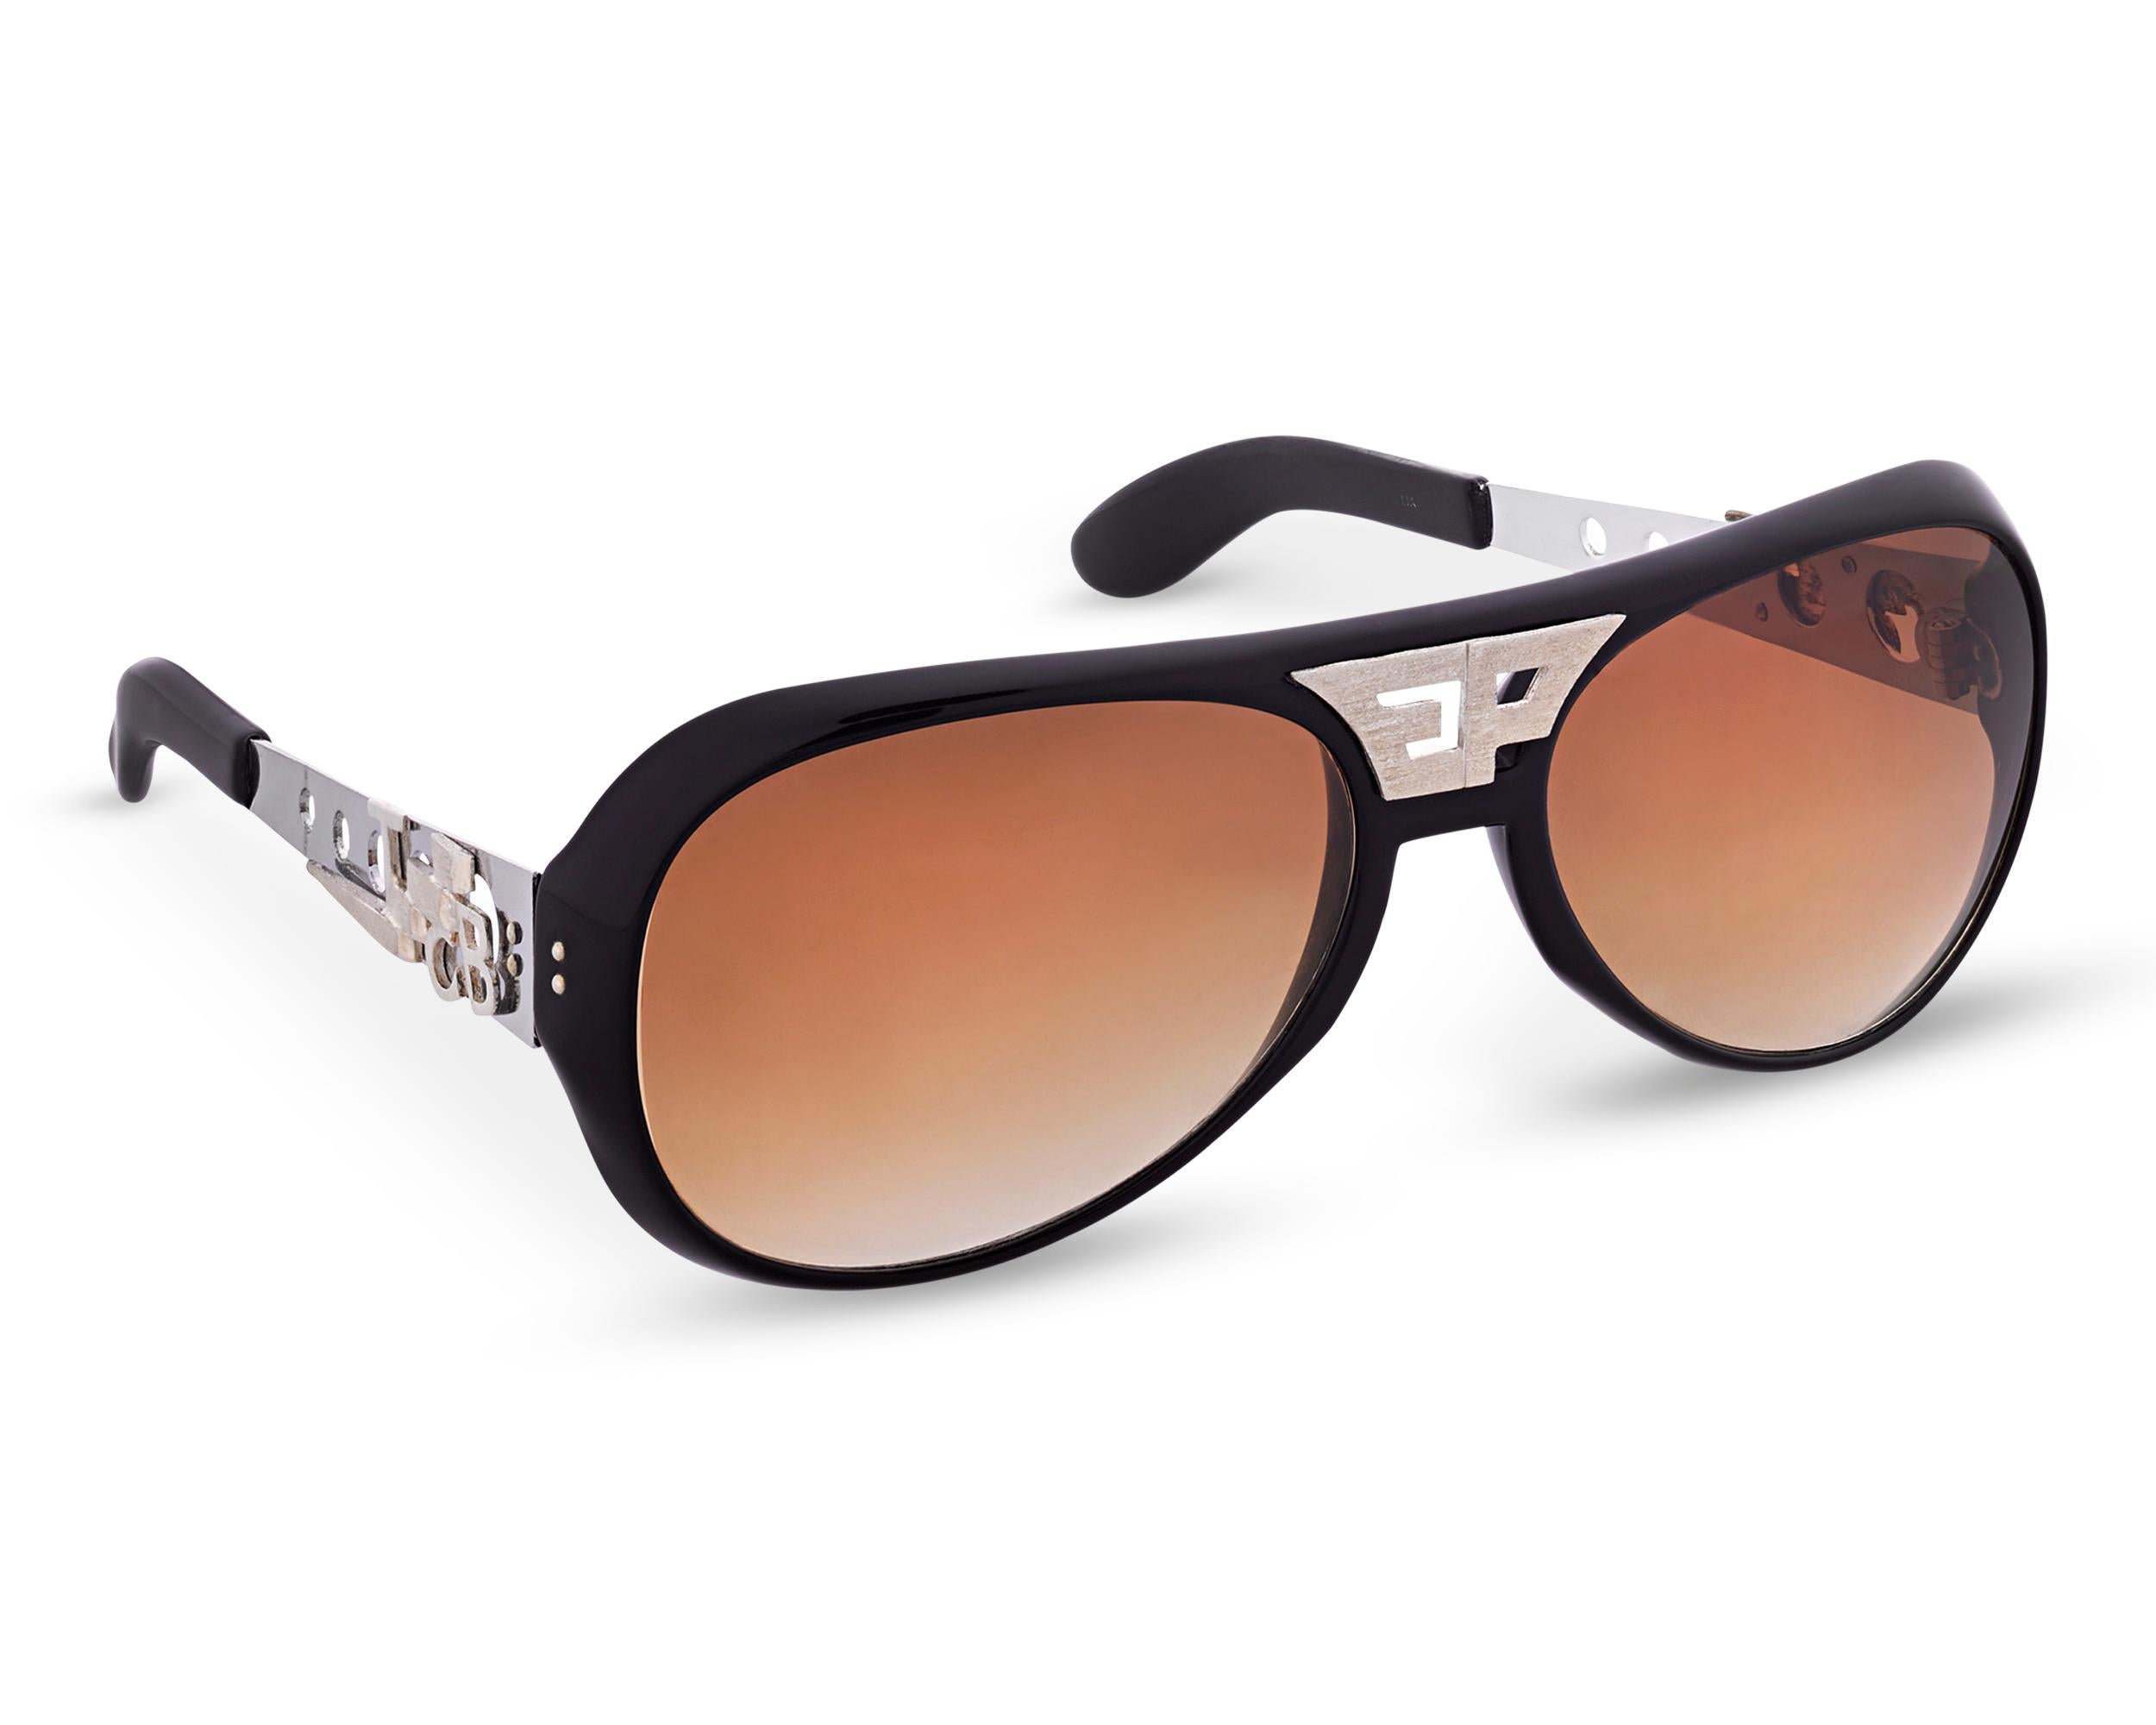 As one of the most celebrated performers of the 20th century, Elvis Presley's image was intertwined with his statement-making fashion choices, most notably his oversized sunglasses and sideburns of the 1970s. This pair of Polaroid aviator sunglasses